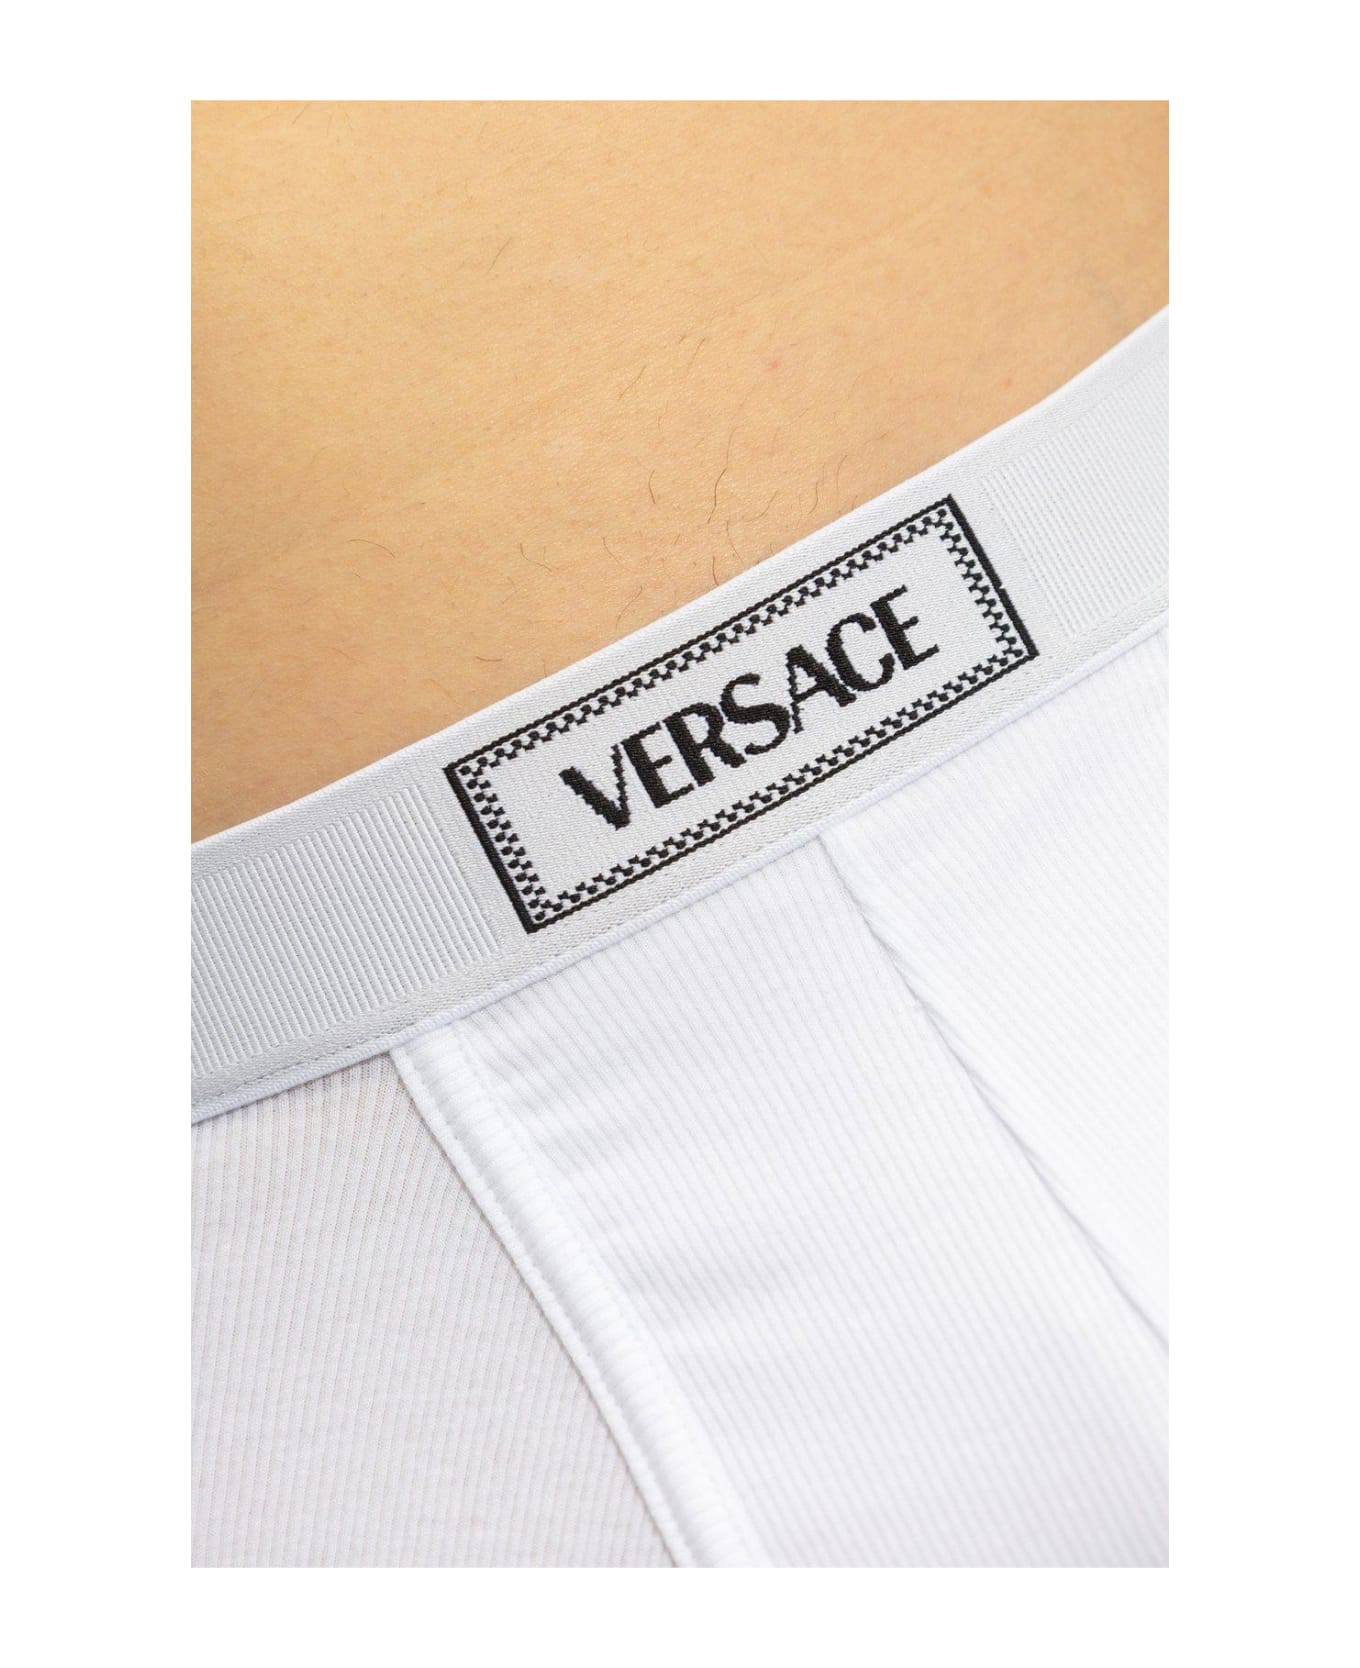 Versace 90s Logo-waistband Stretched Boxer Briefs - White ショーツ